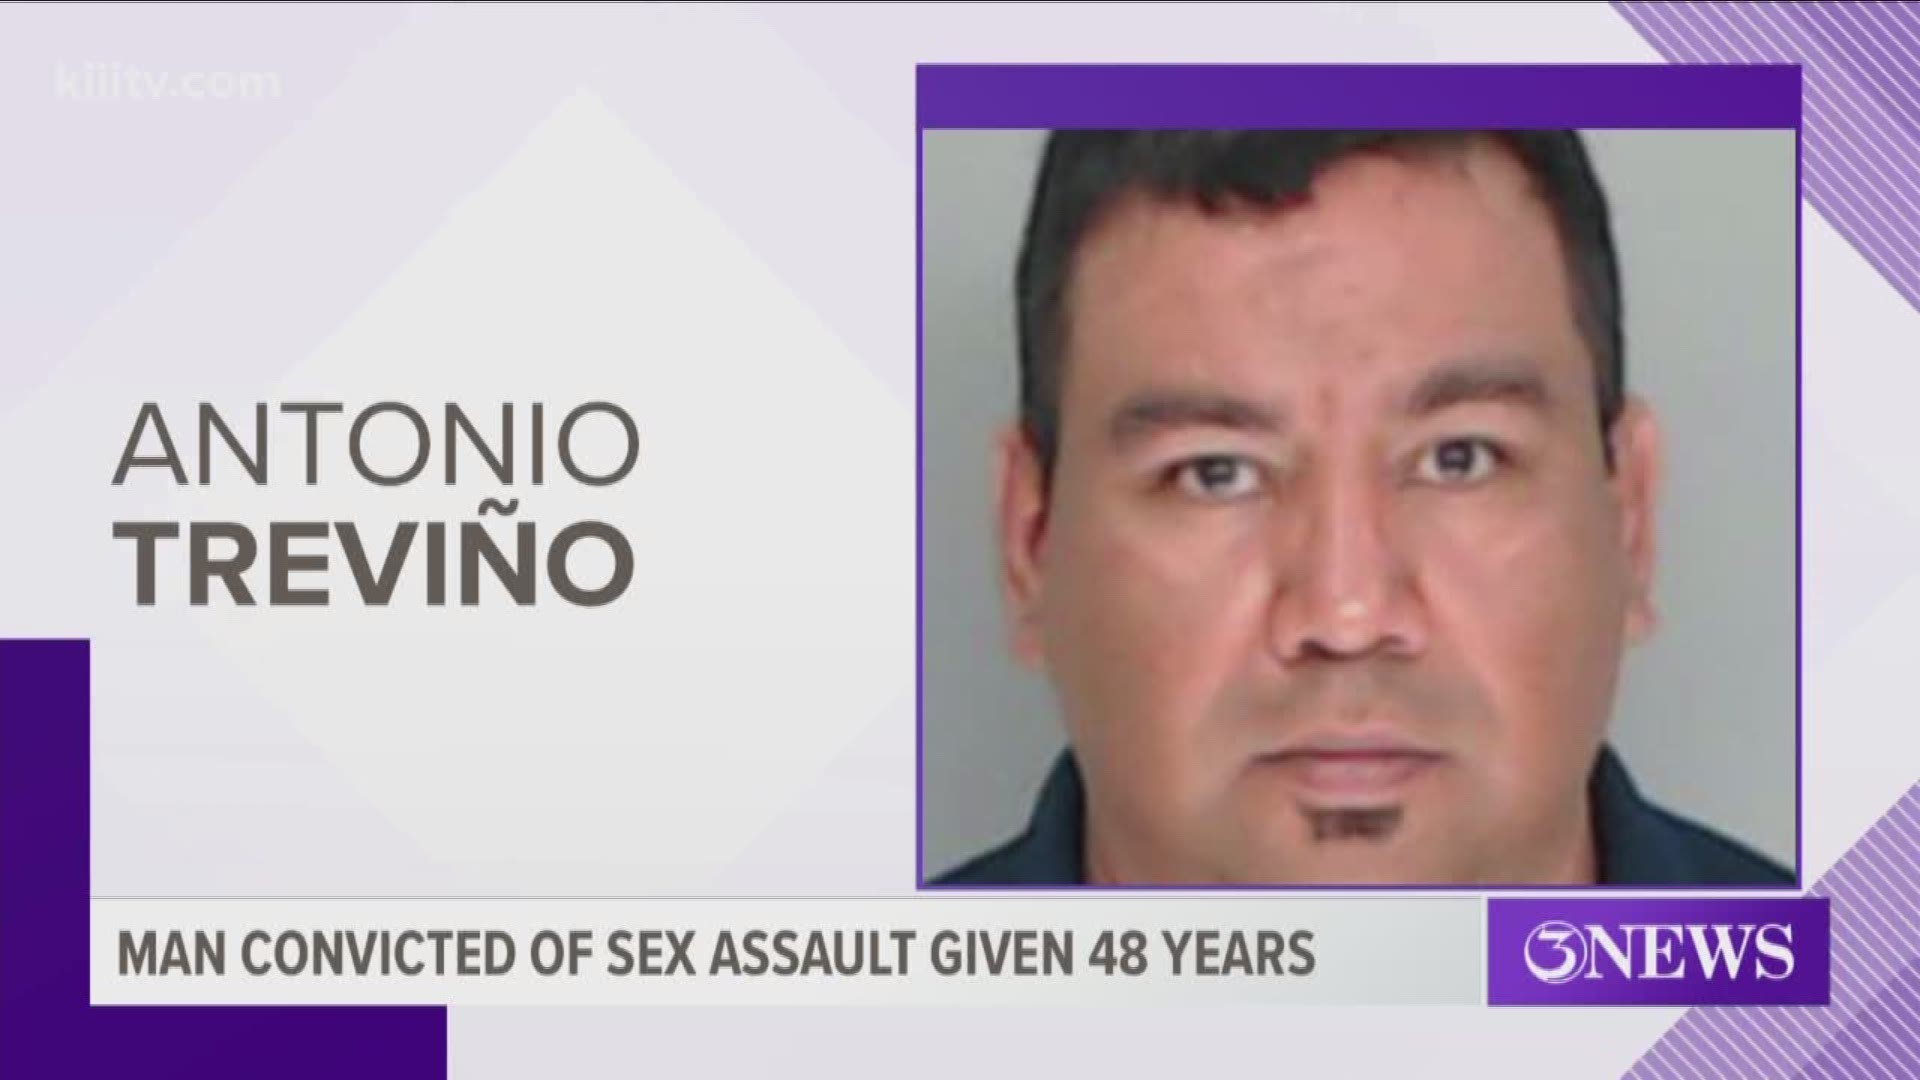 Antonio Trevino was found guilty Wednesday in the 214th District Court.